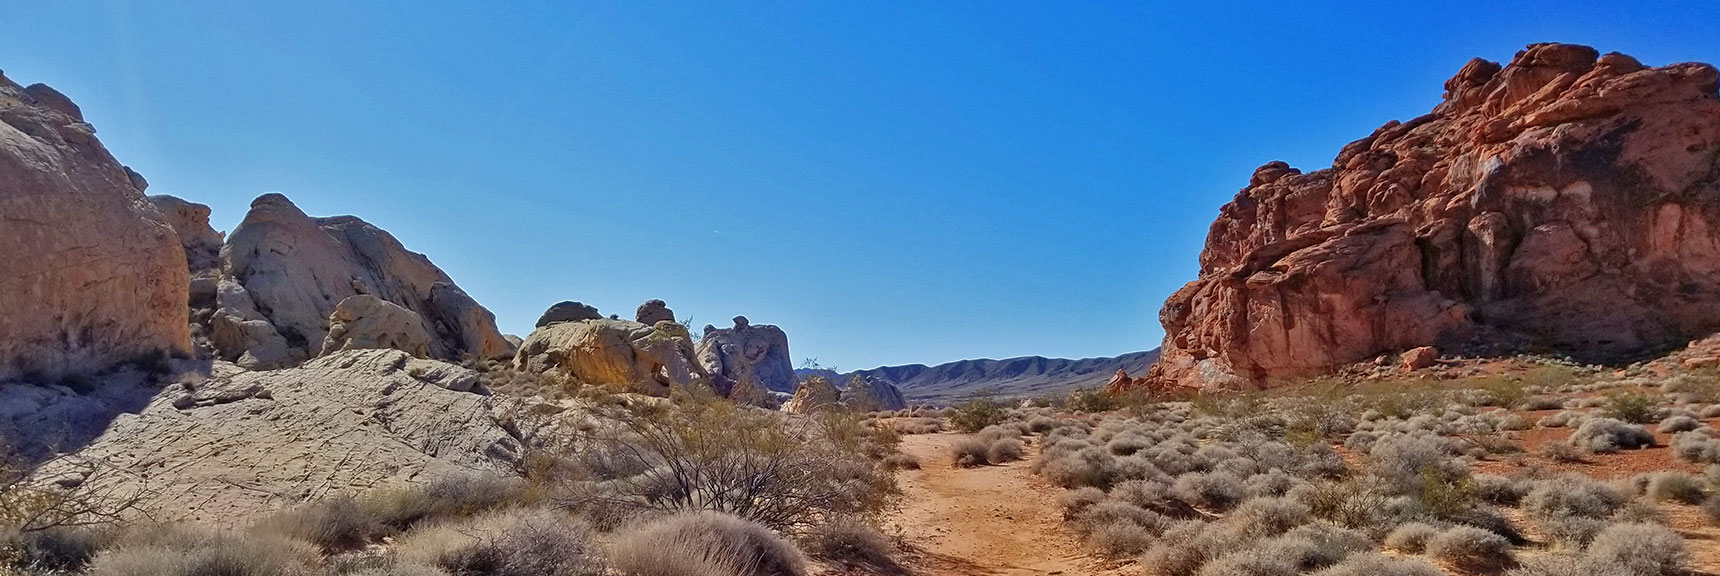 Looking Back on the White Domes Loop Trail in Valley of Fire State Park, Nevada